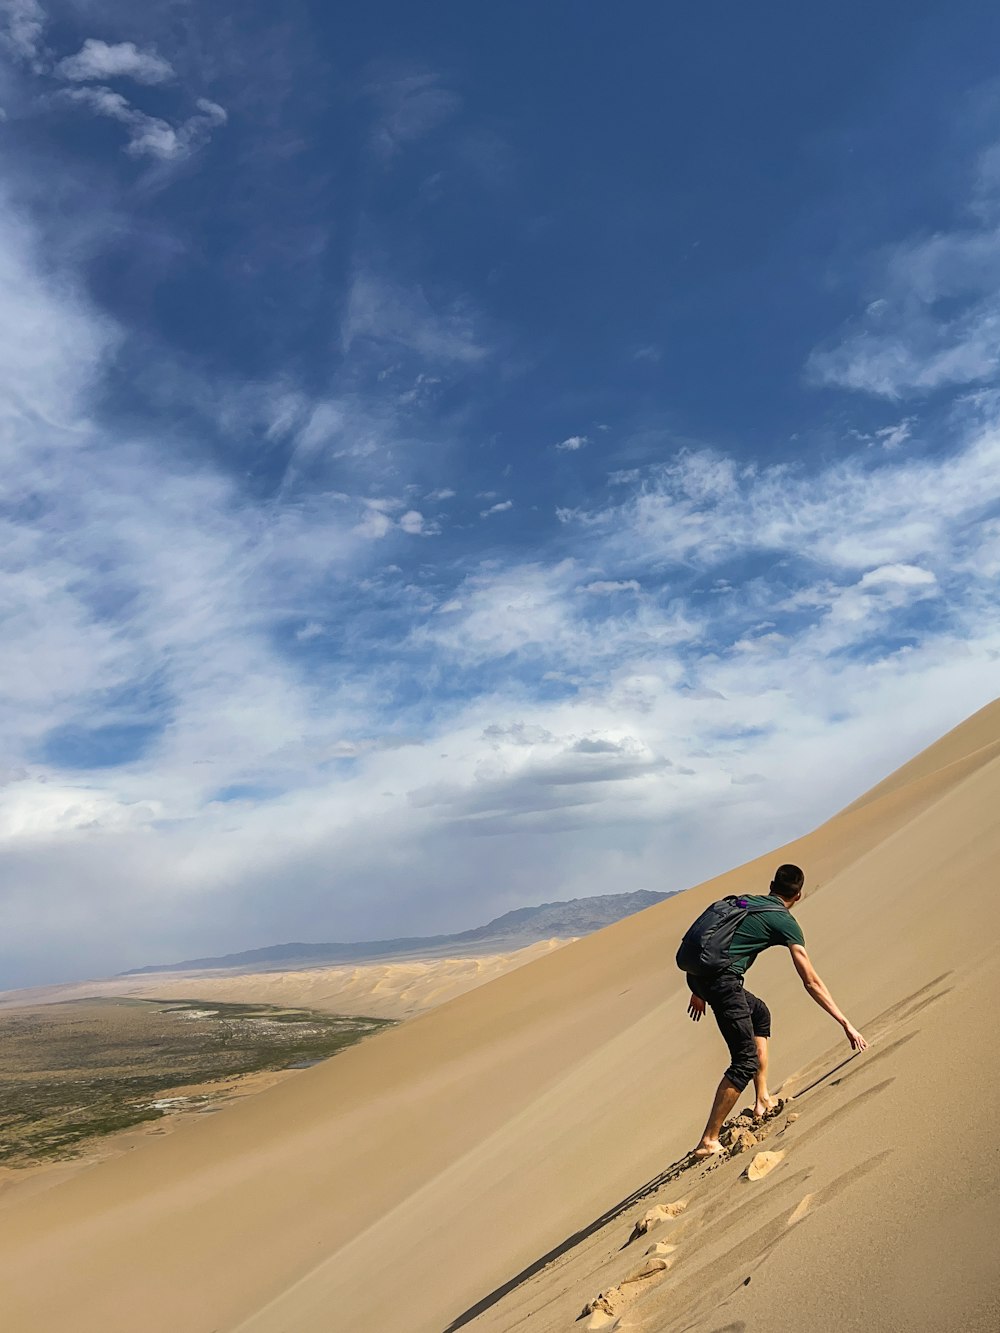 a man riding skis down the side of a sand dune